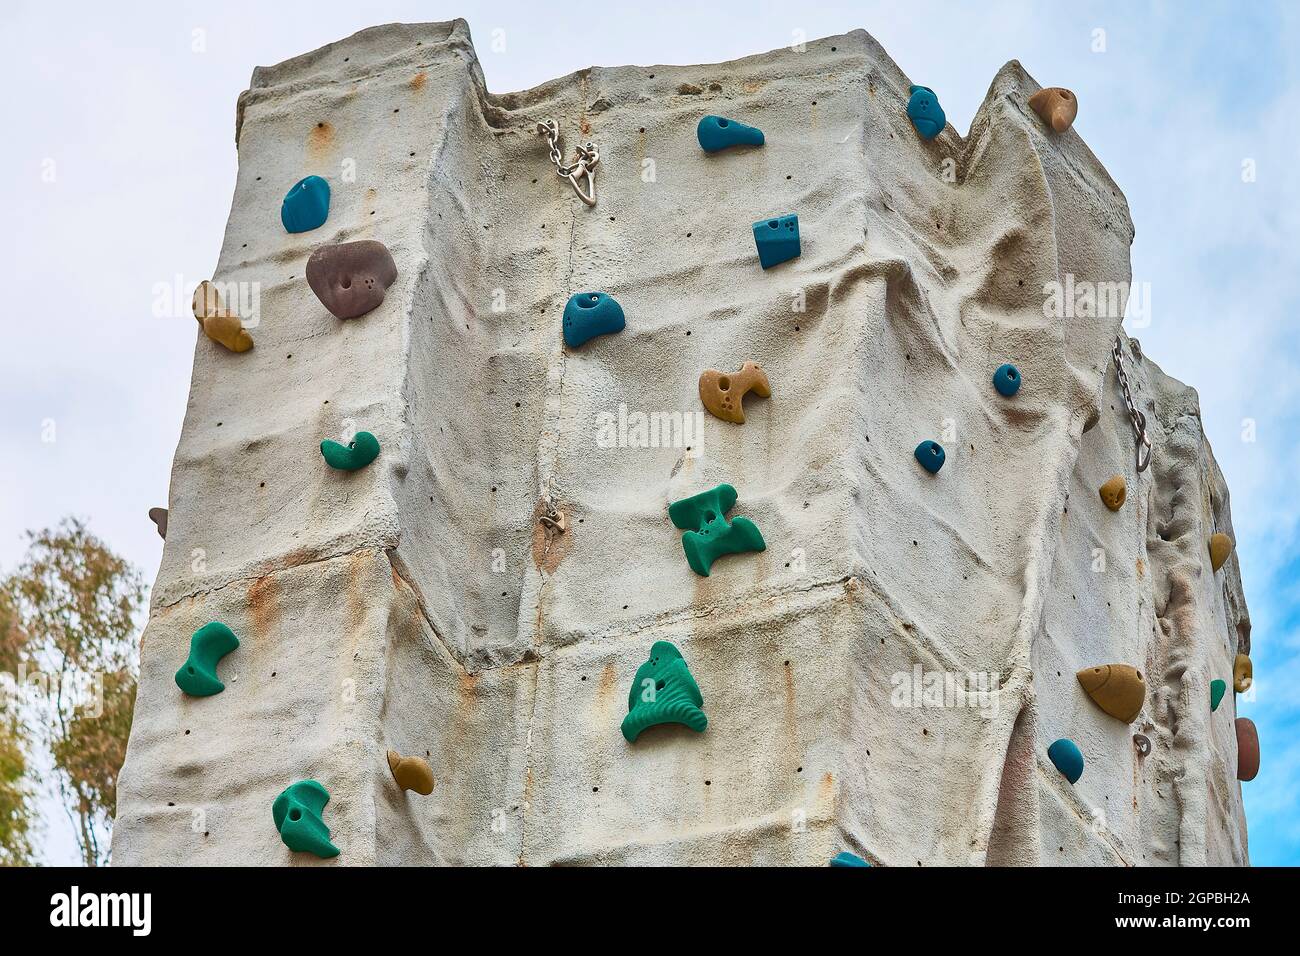 artificial climbing wall for outdoor climbing with fastening elements ...